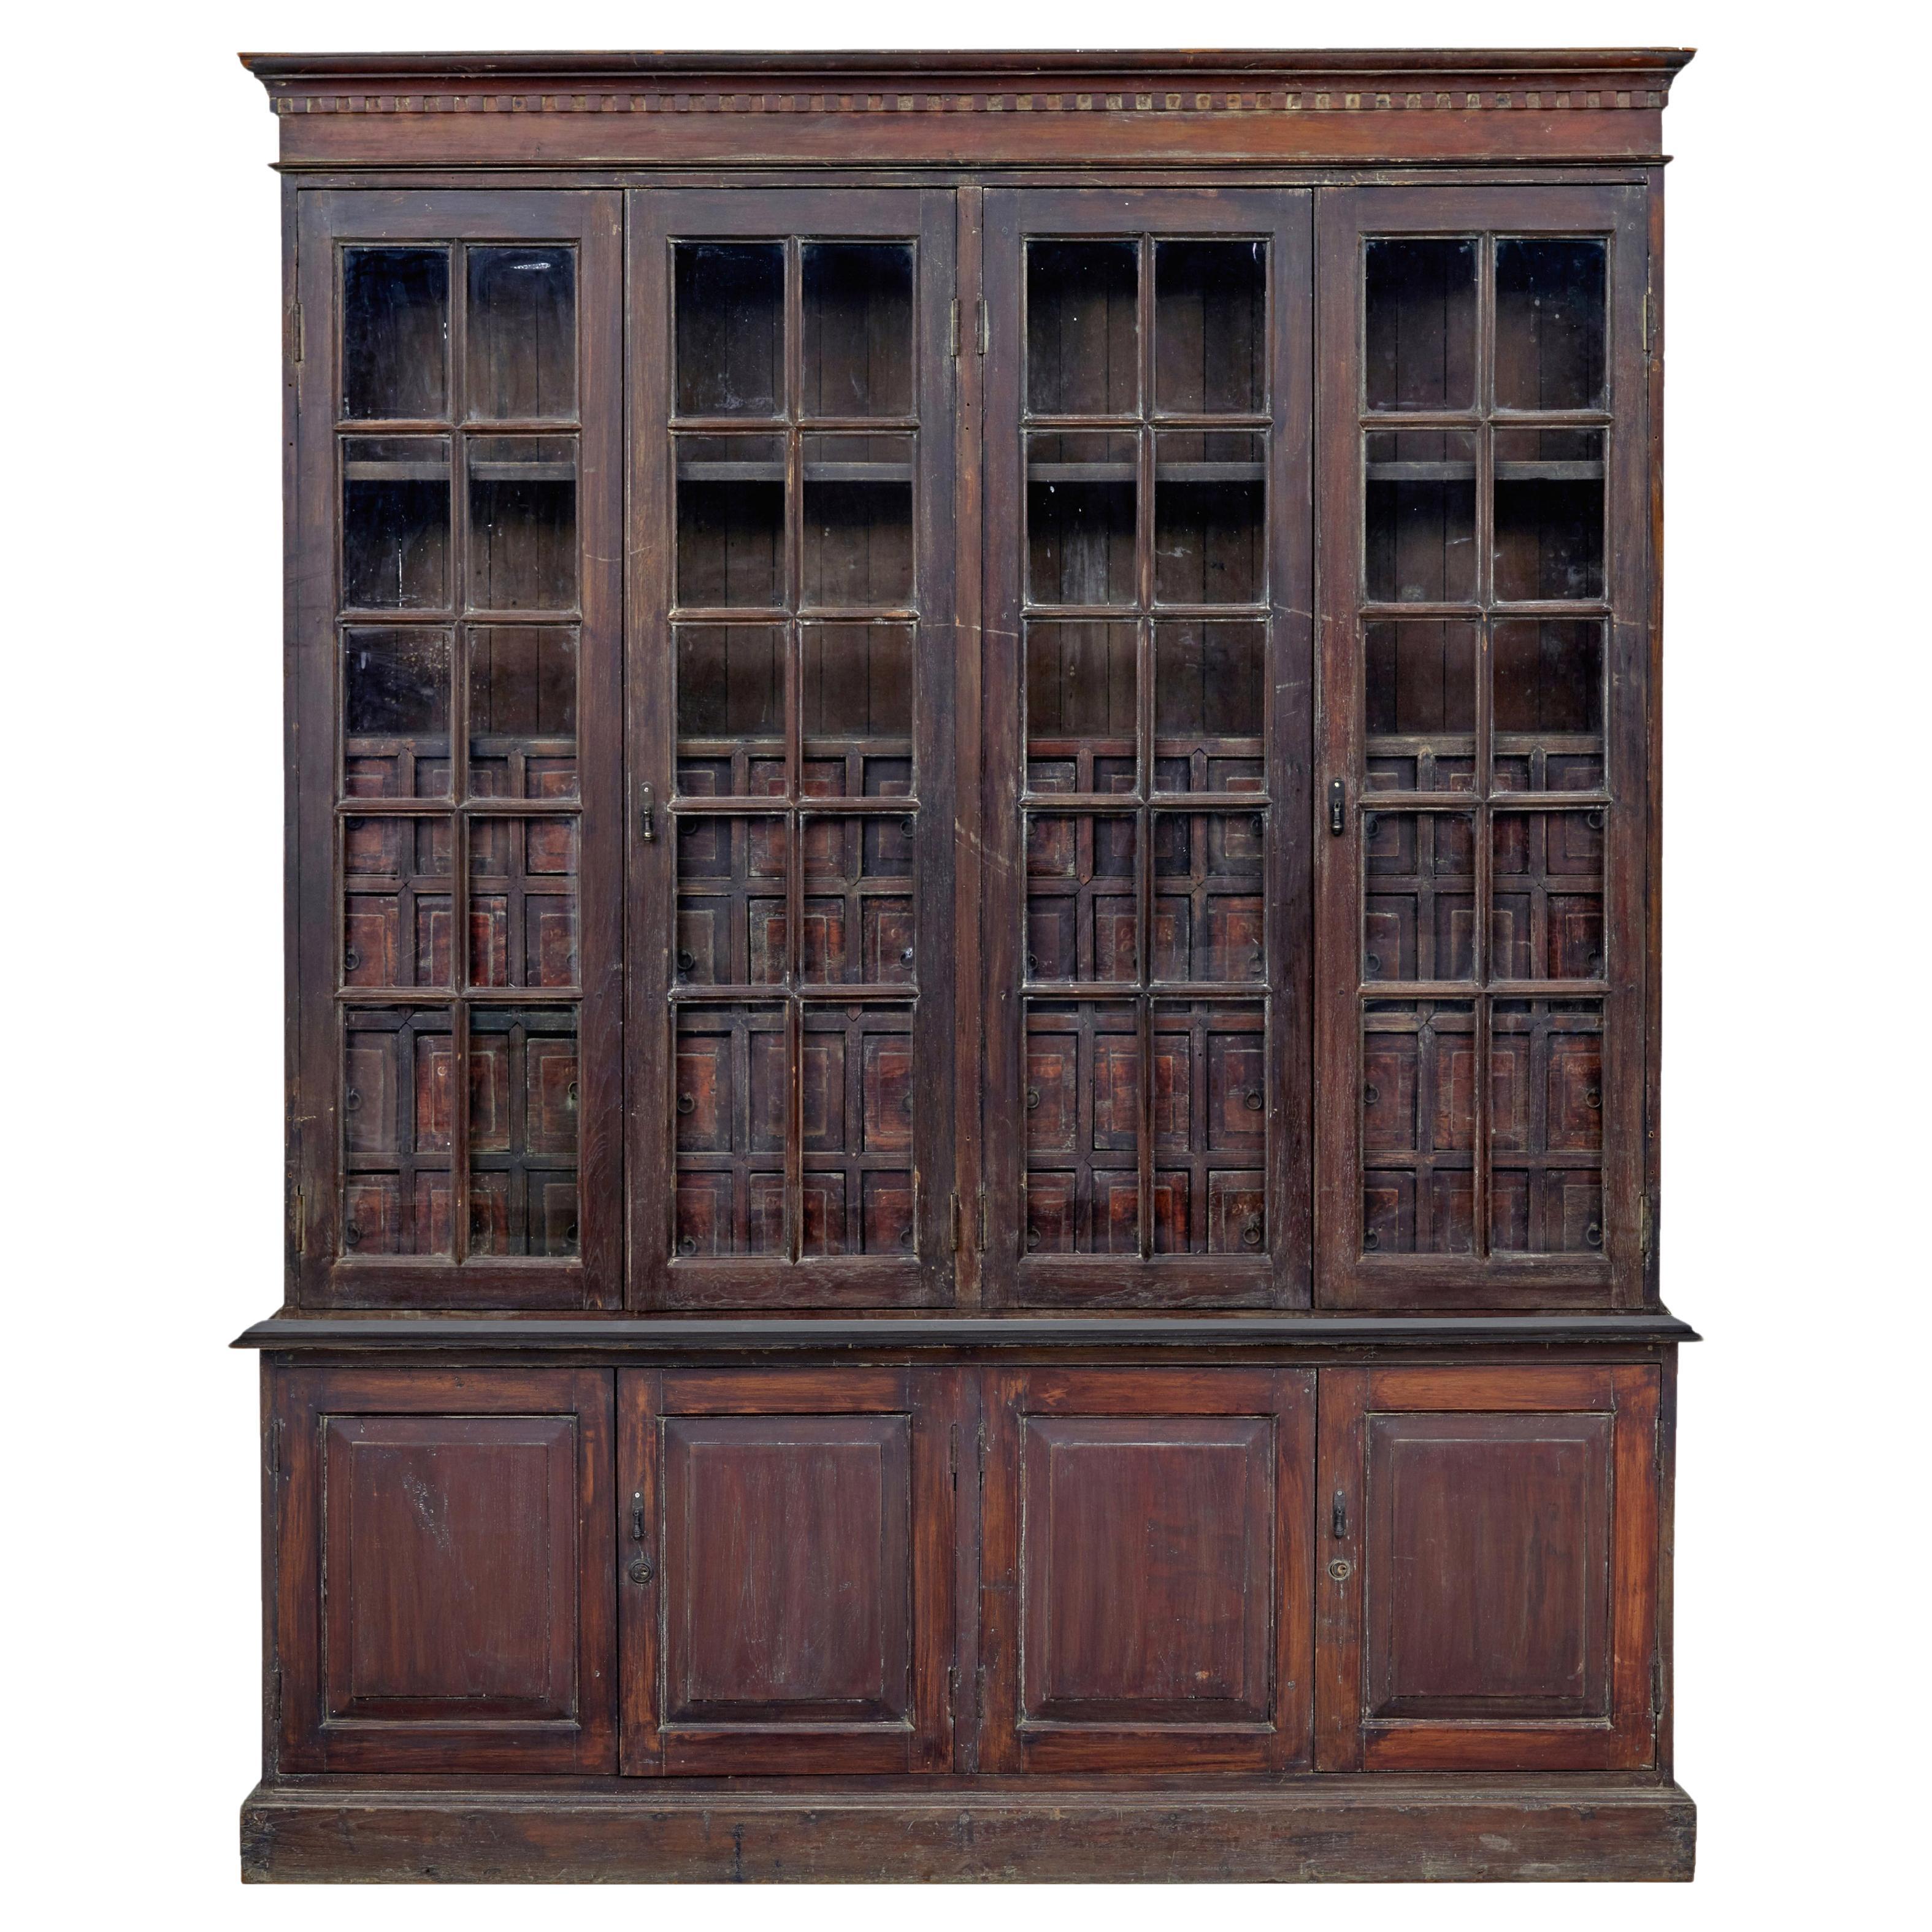 Large 19th century Burmese colonial haberdashery cabinet For Sale